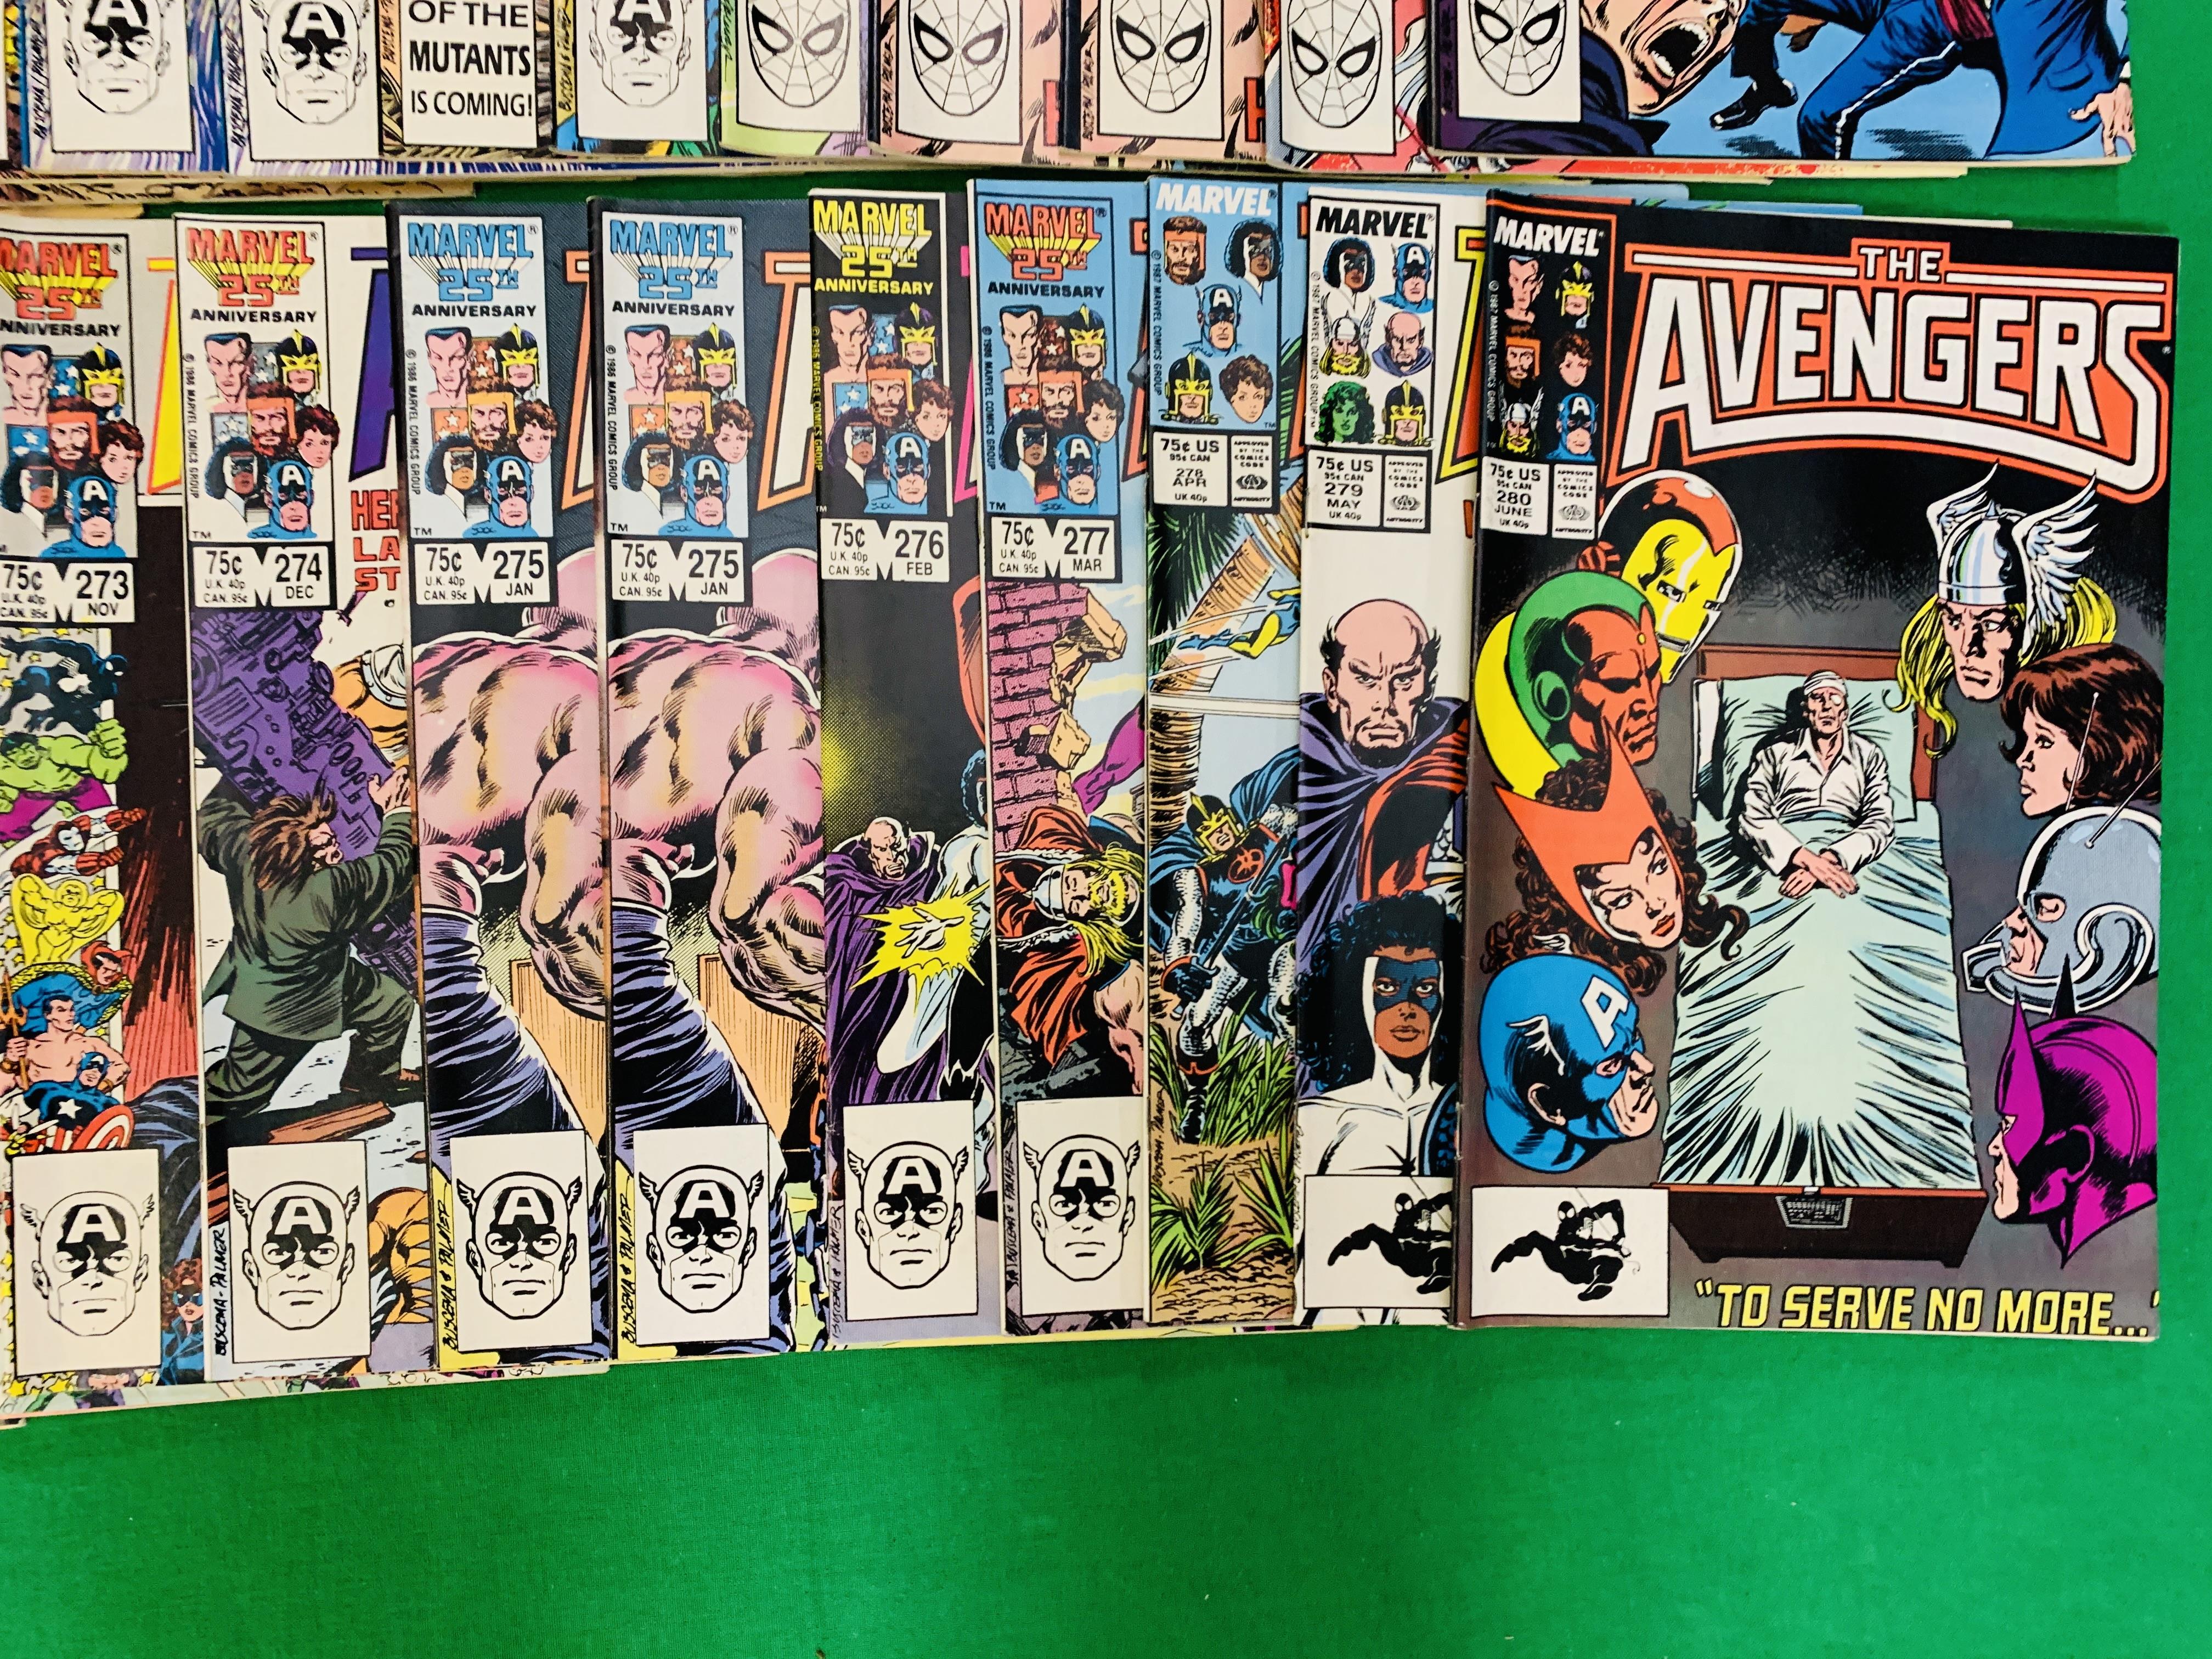 MARVEL COMICS THE AVENGERS NO. 101 - 299, MISSING ISSUES 103 AND 110. - Image 126 of 130